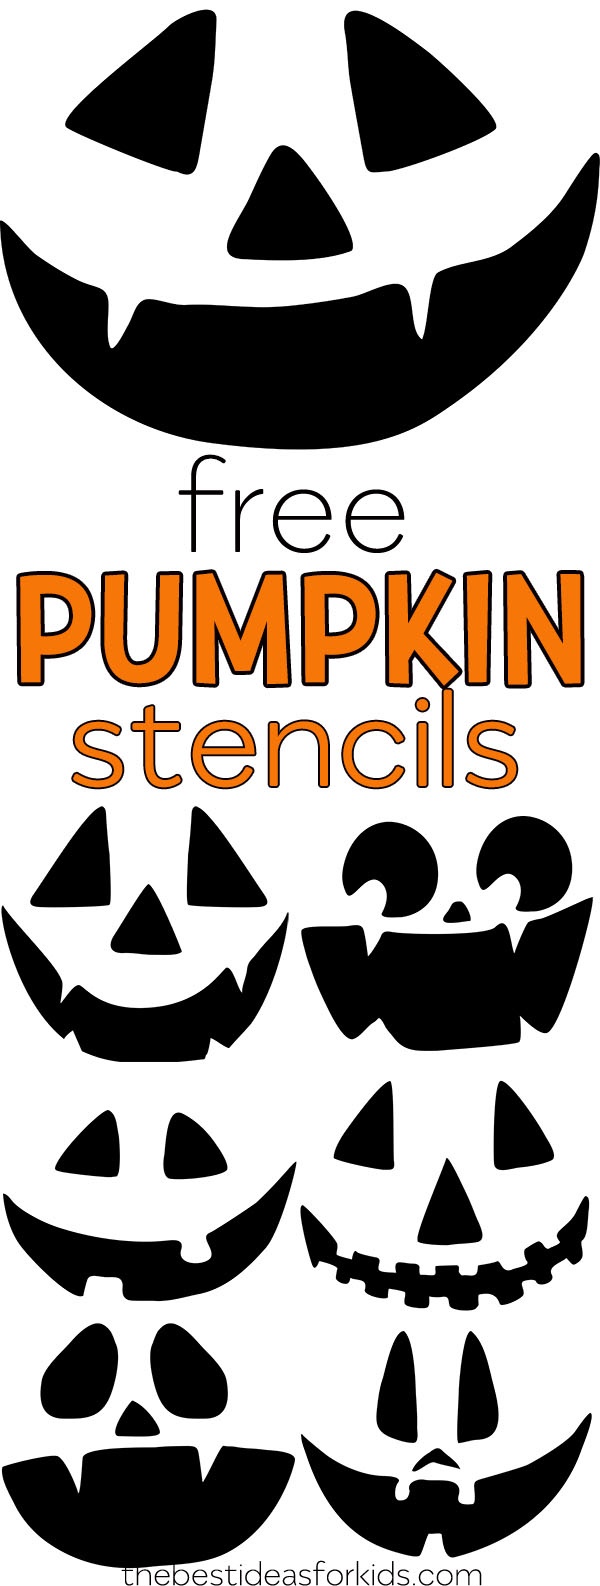 Free Pumpkin Carving Stencils - The Best Ideas For Kids - Free Pumpkin Printable Carving Patterns